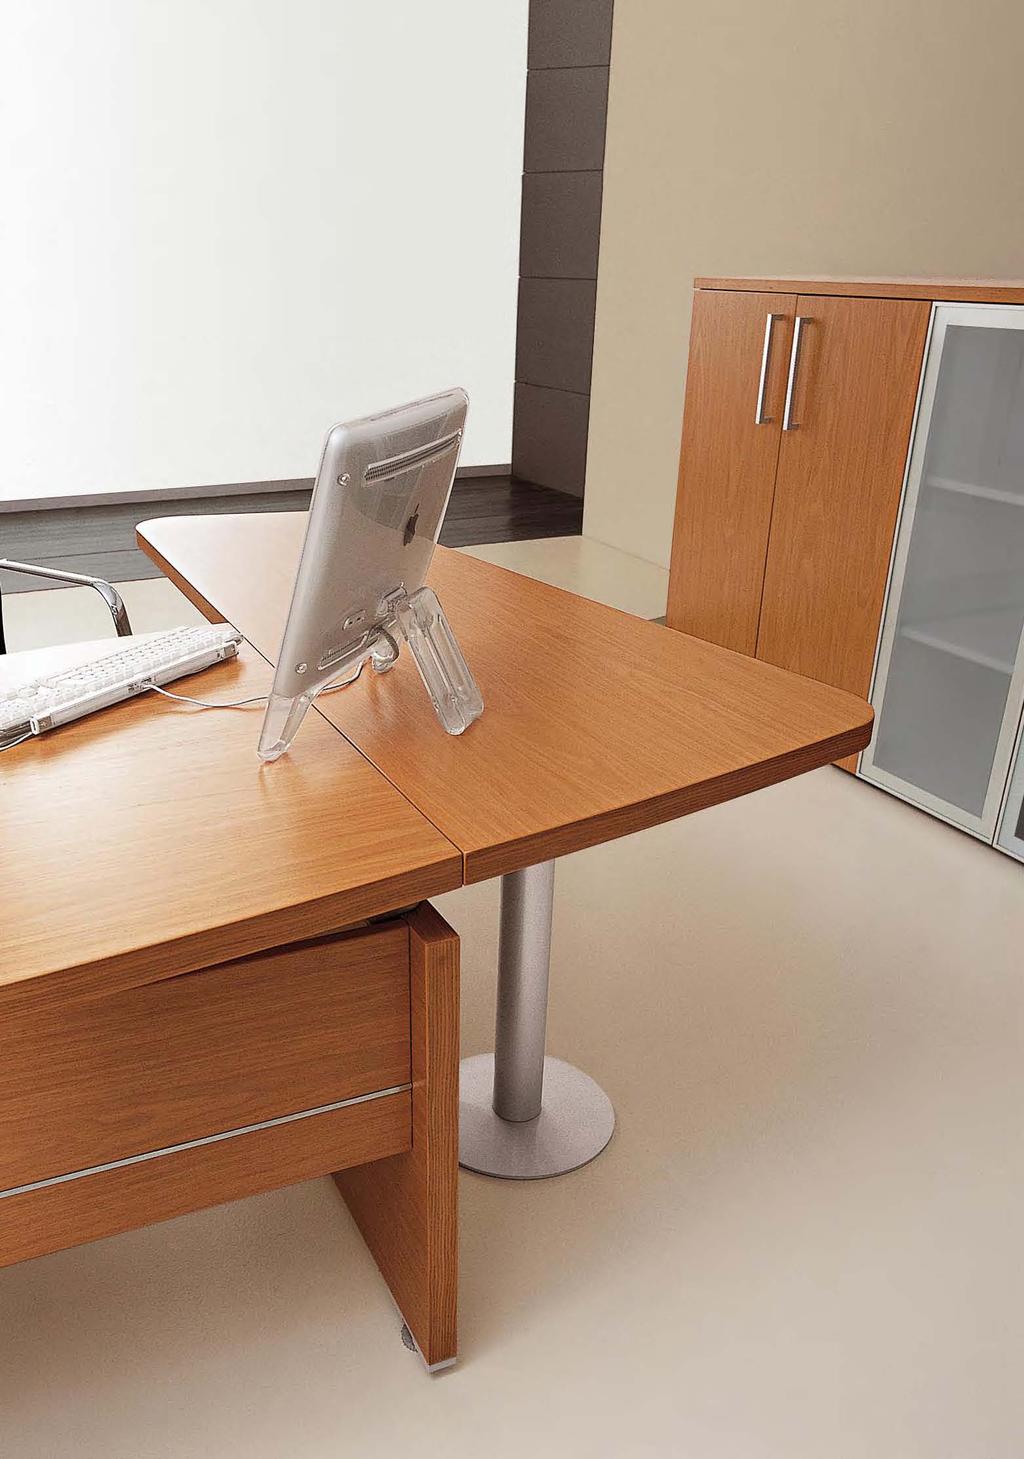 The wooden or glass link units are wide and shaped to be perfectly connected to the several work tops.